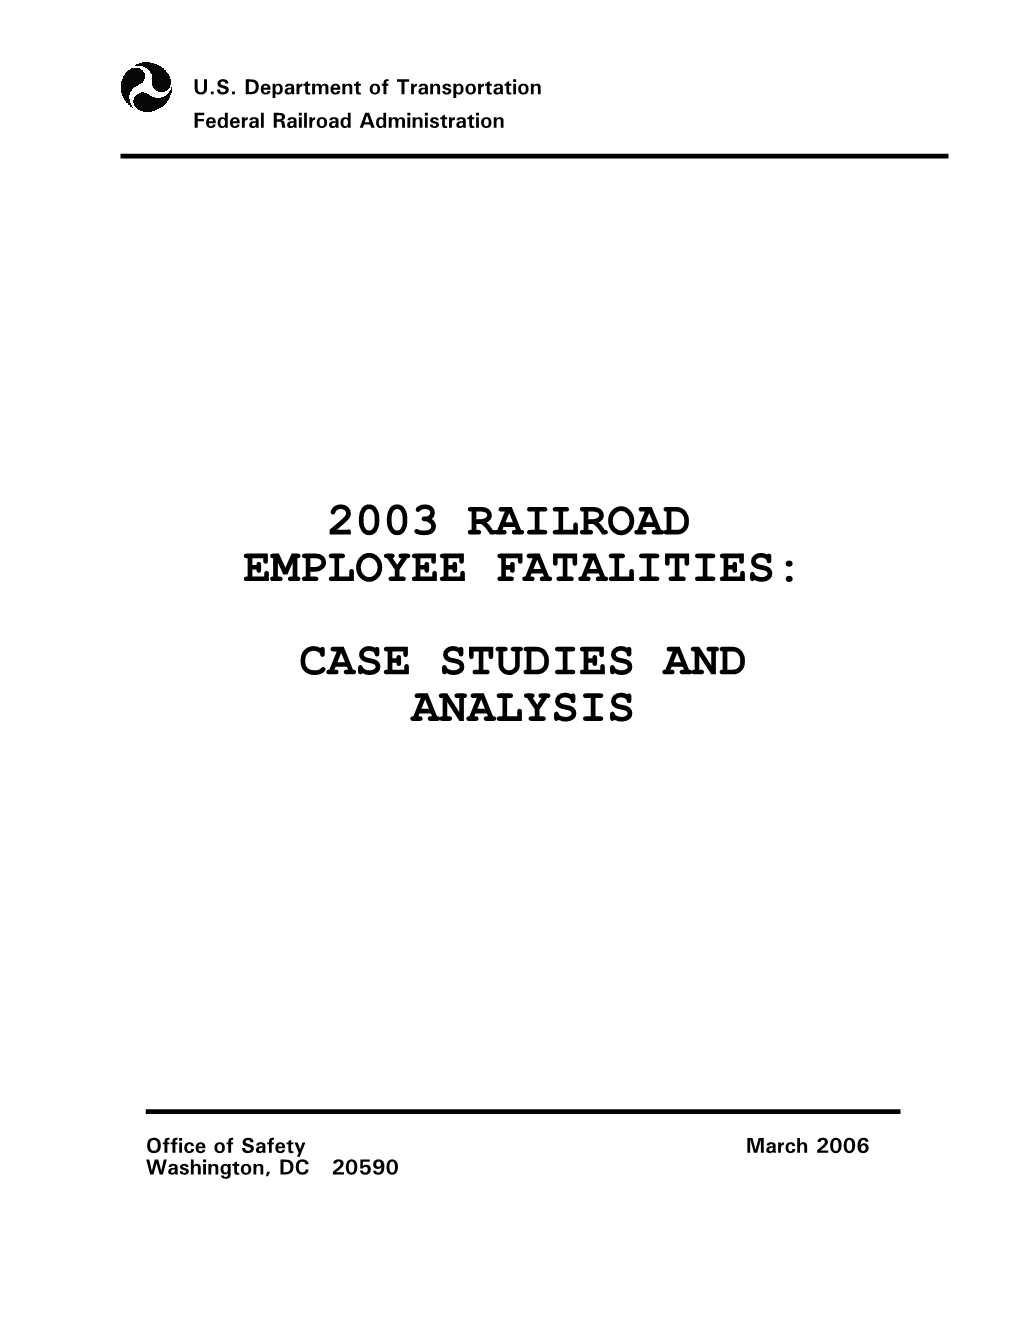 2003 Railroad Employee Fatalities: Case Studies and Analysis